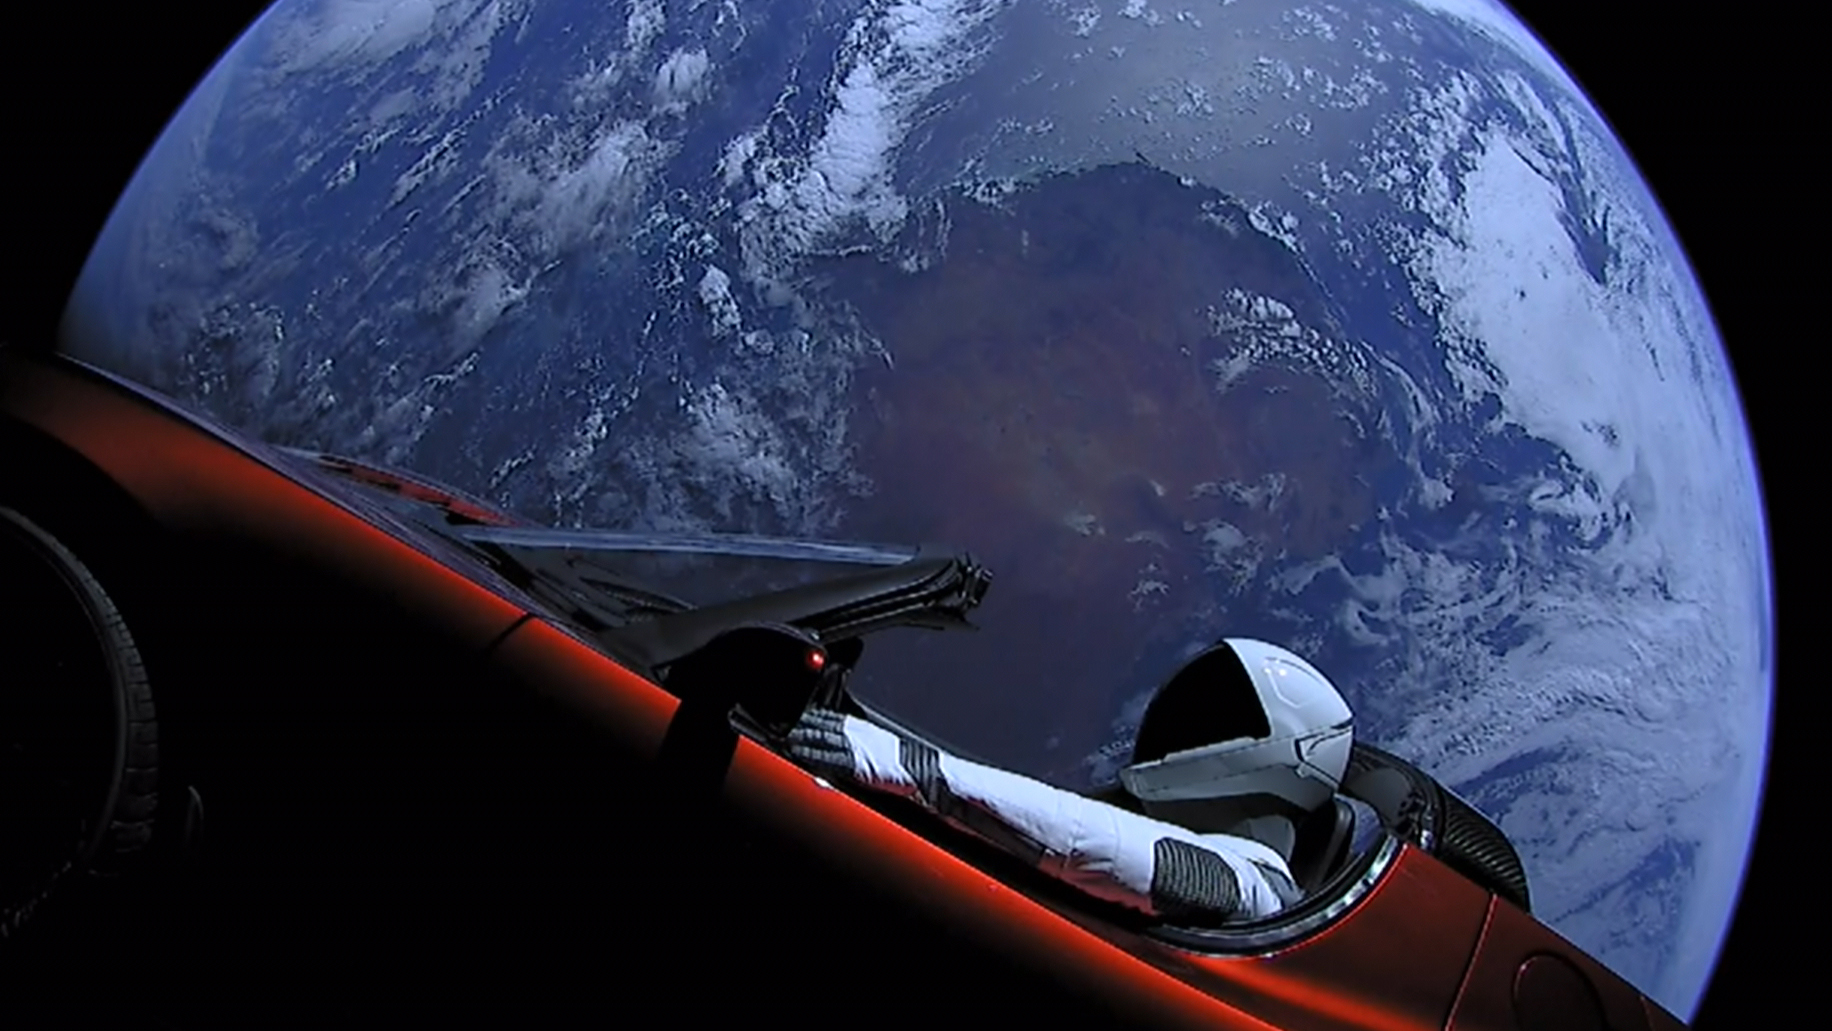 Image of Tesla Roadster and Starman dummy astronaut in space, looking down on the Earth